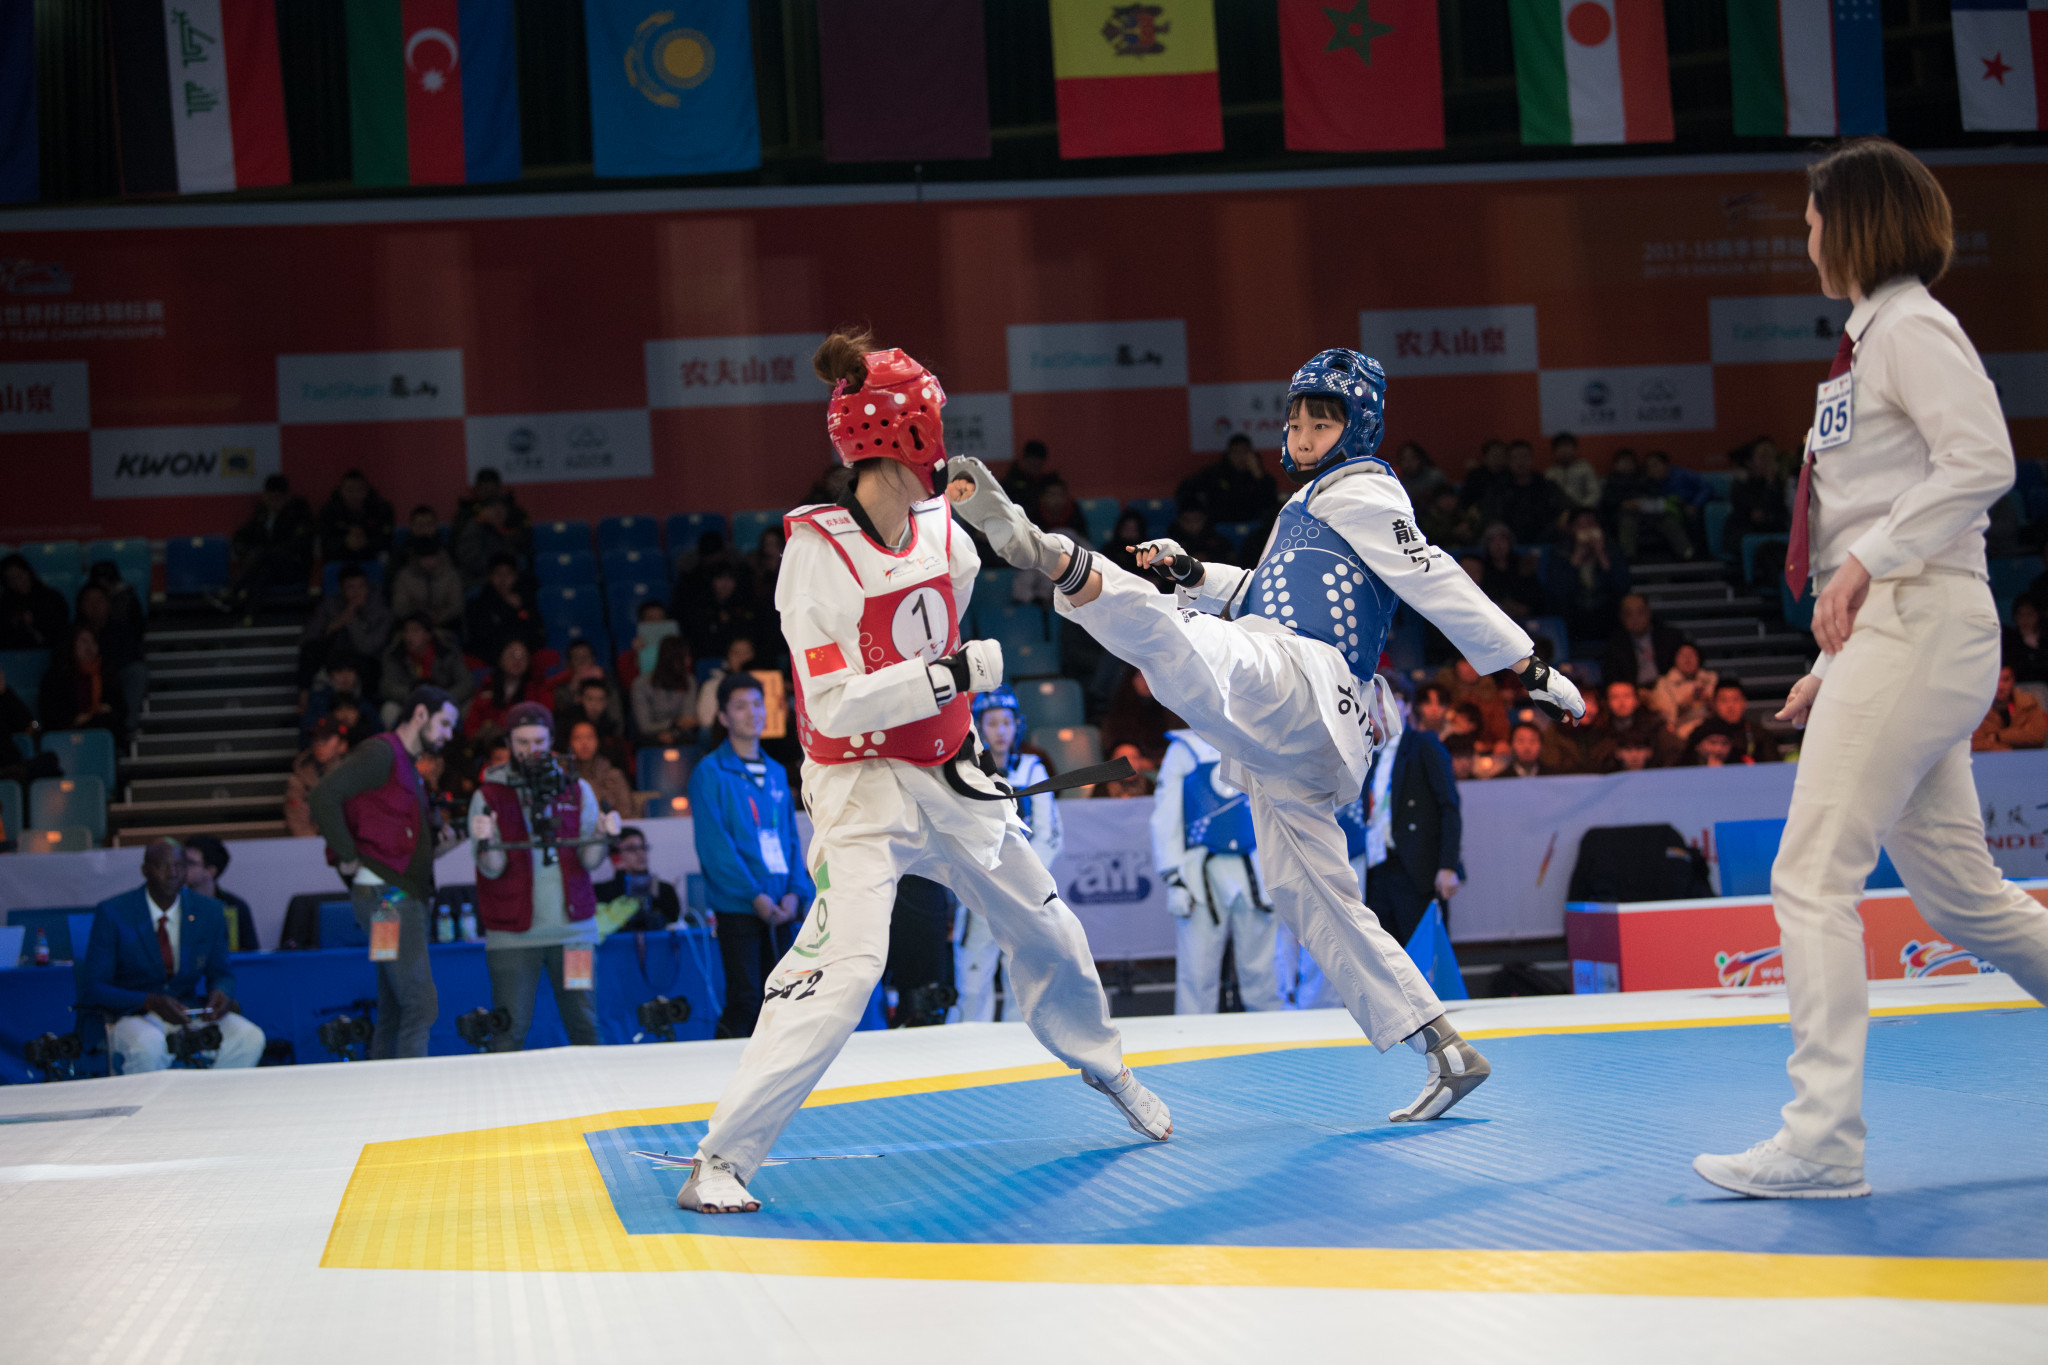 A head-kick is attempted in the women's competition ©World Taekwondo